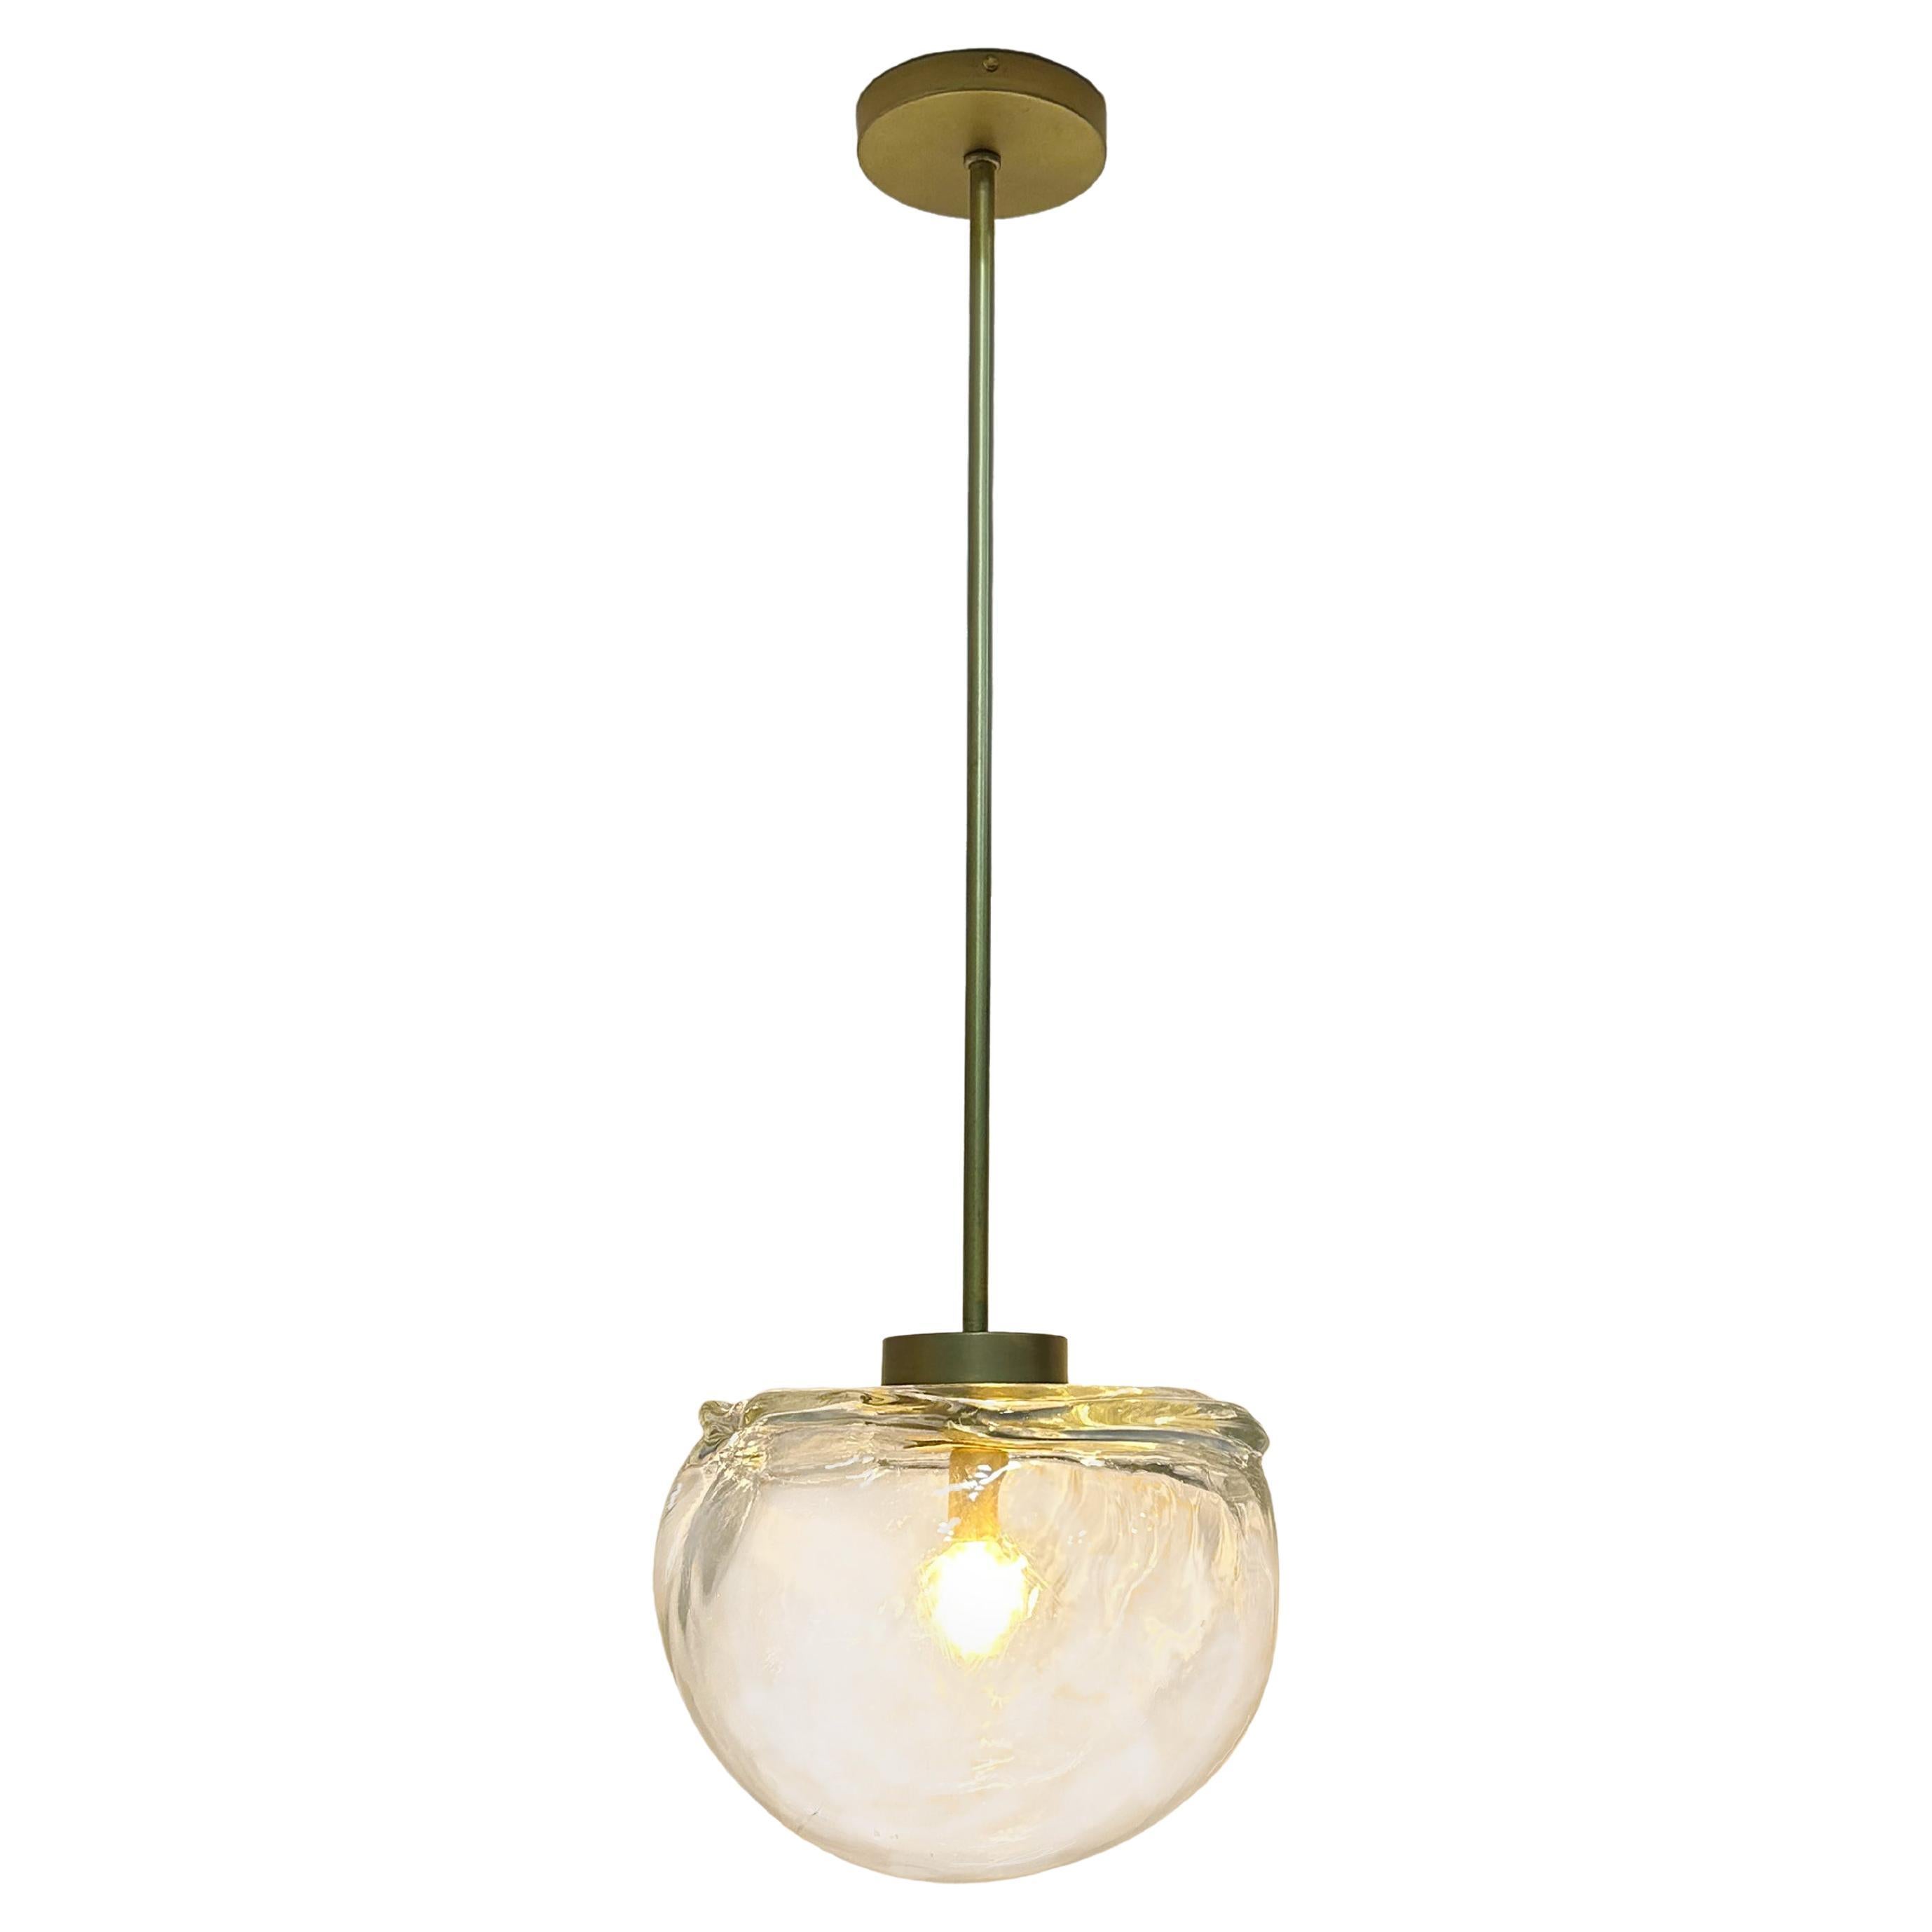 Formation Pendant Light in Brushed Brass 